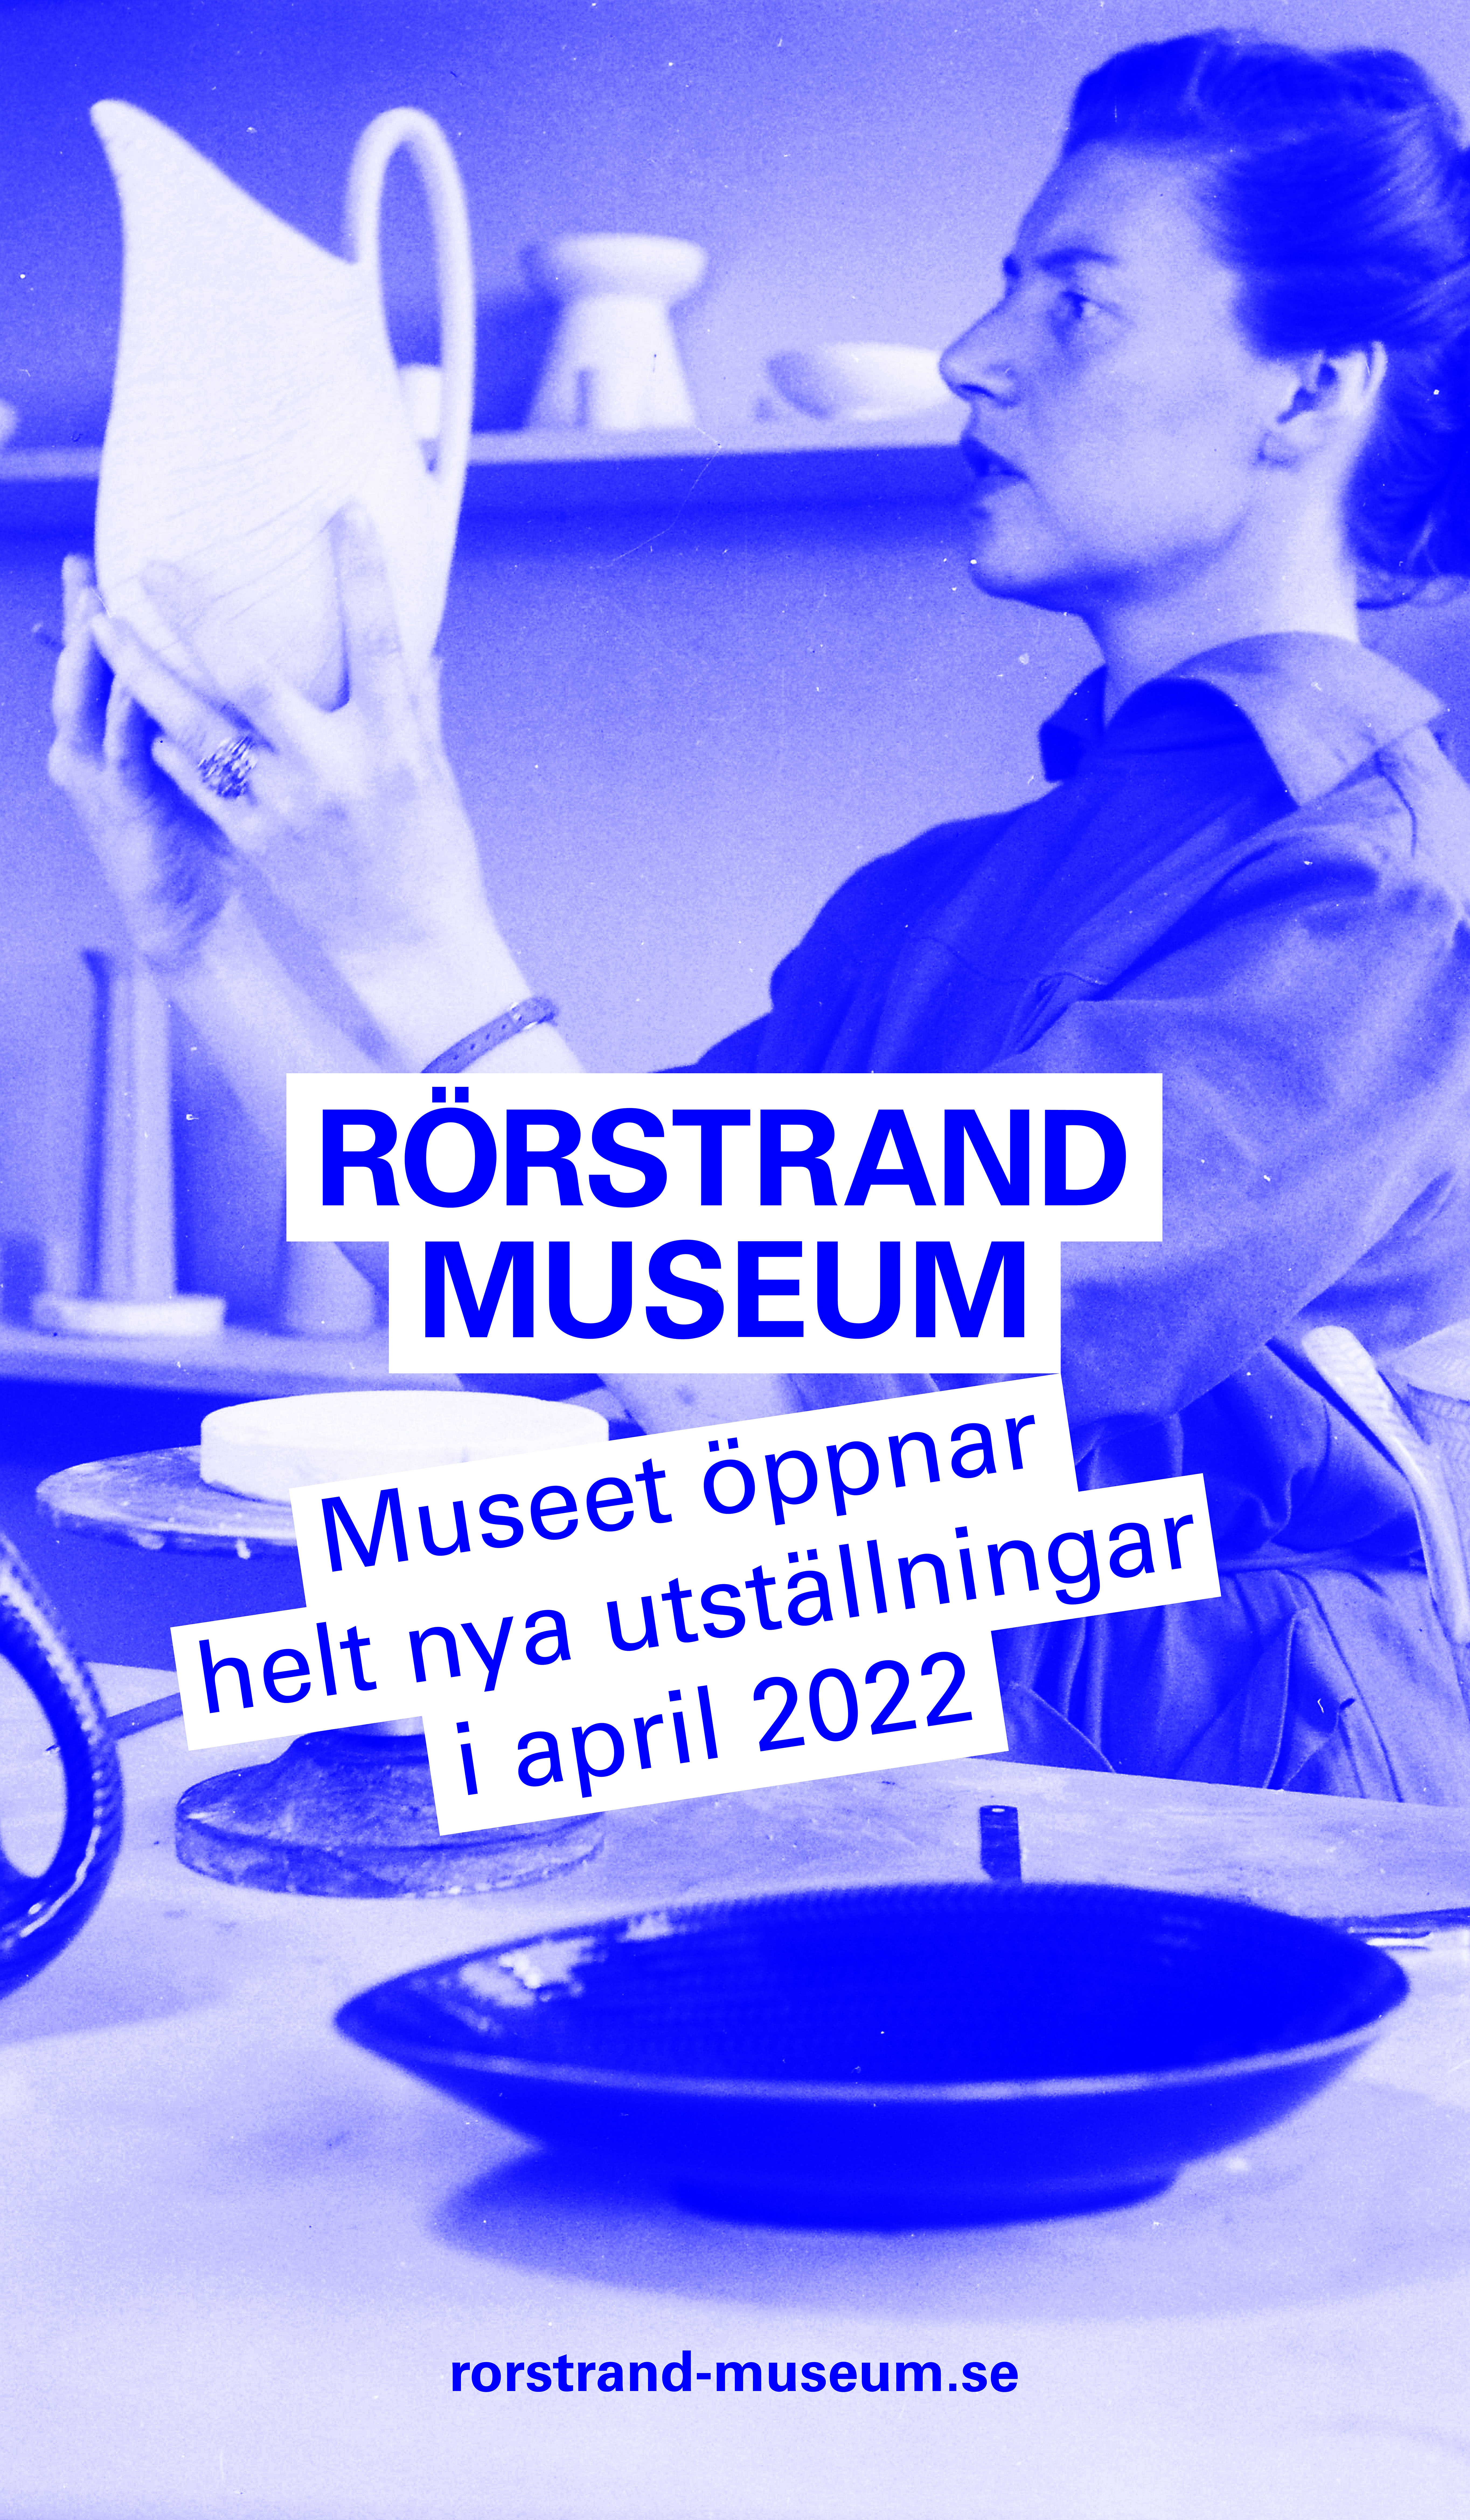 Rörstrand Museum. Three Factories in Three Cities for 300 Years. New graphic language, creative/art direction for the museum that opens with new exhibitions in April 2022. With Tove Alderin Studio/TAS. Ongoing.